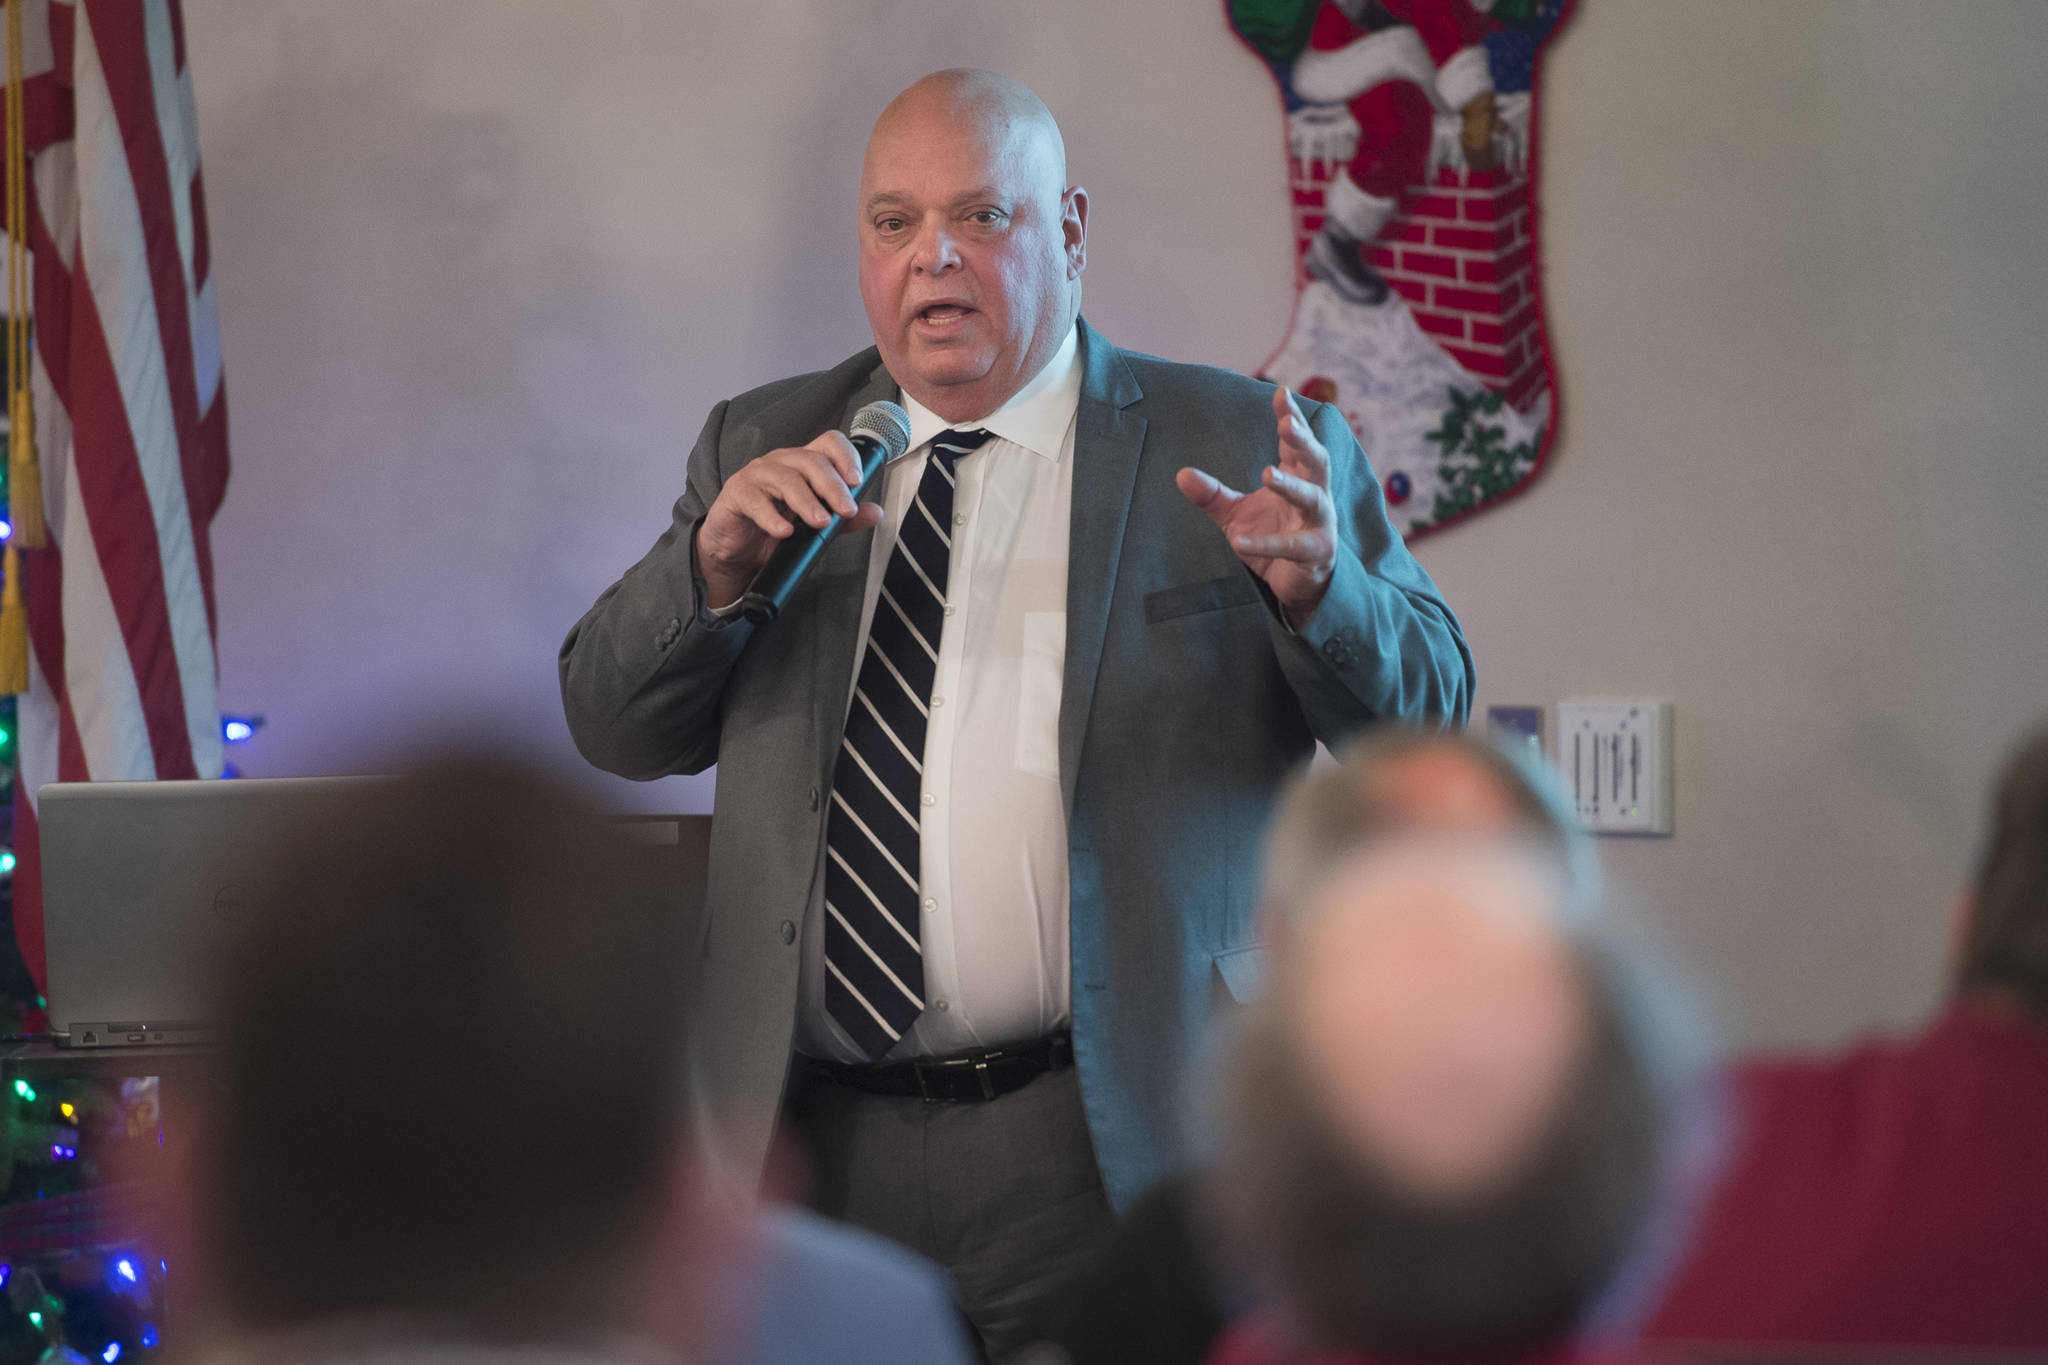 Chuck Wimberly, President & CEO of Goldbelt Inc., speaks to the Juneau Chamber of Commerce during its weekly luncheon at the Moose Lodge on Thursday, Dec. 6, 2018. (Michael Penn | Juneau Empire)